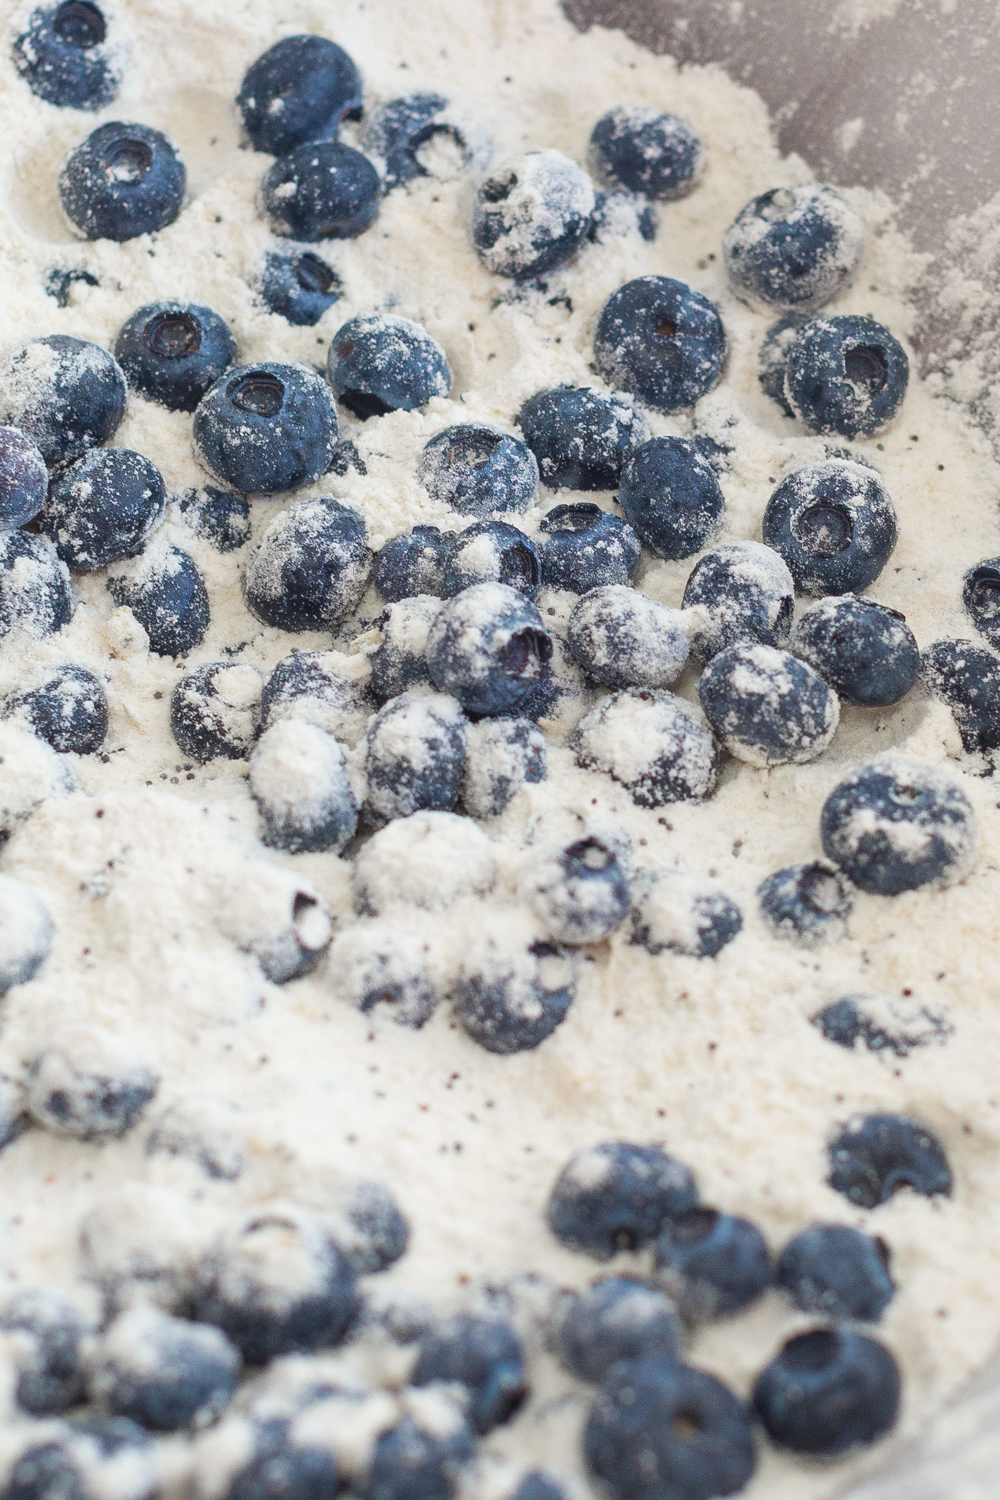 Blueberries tossed in dry ingredients for muffins.